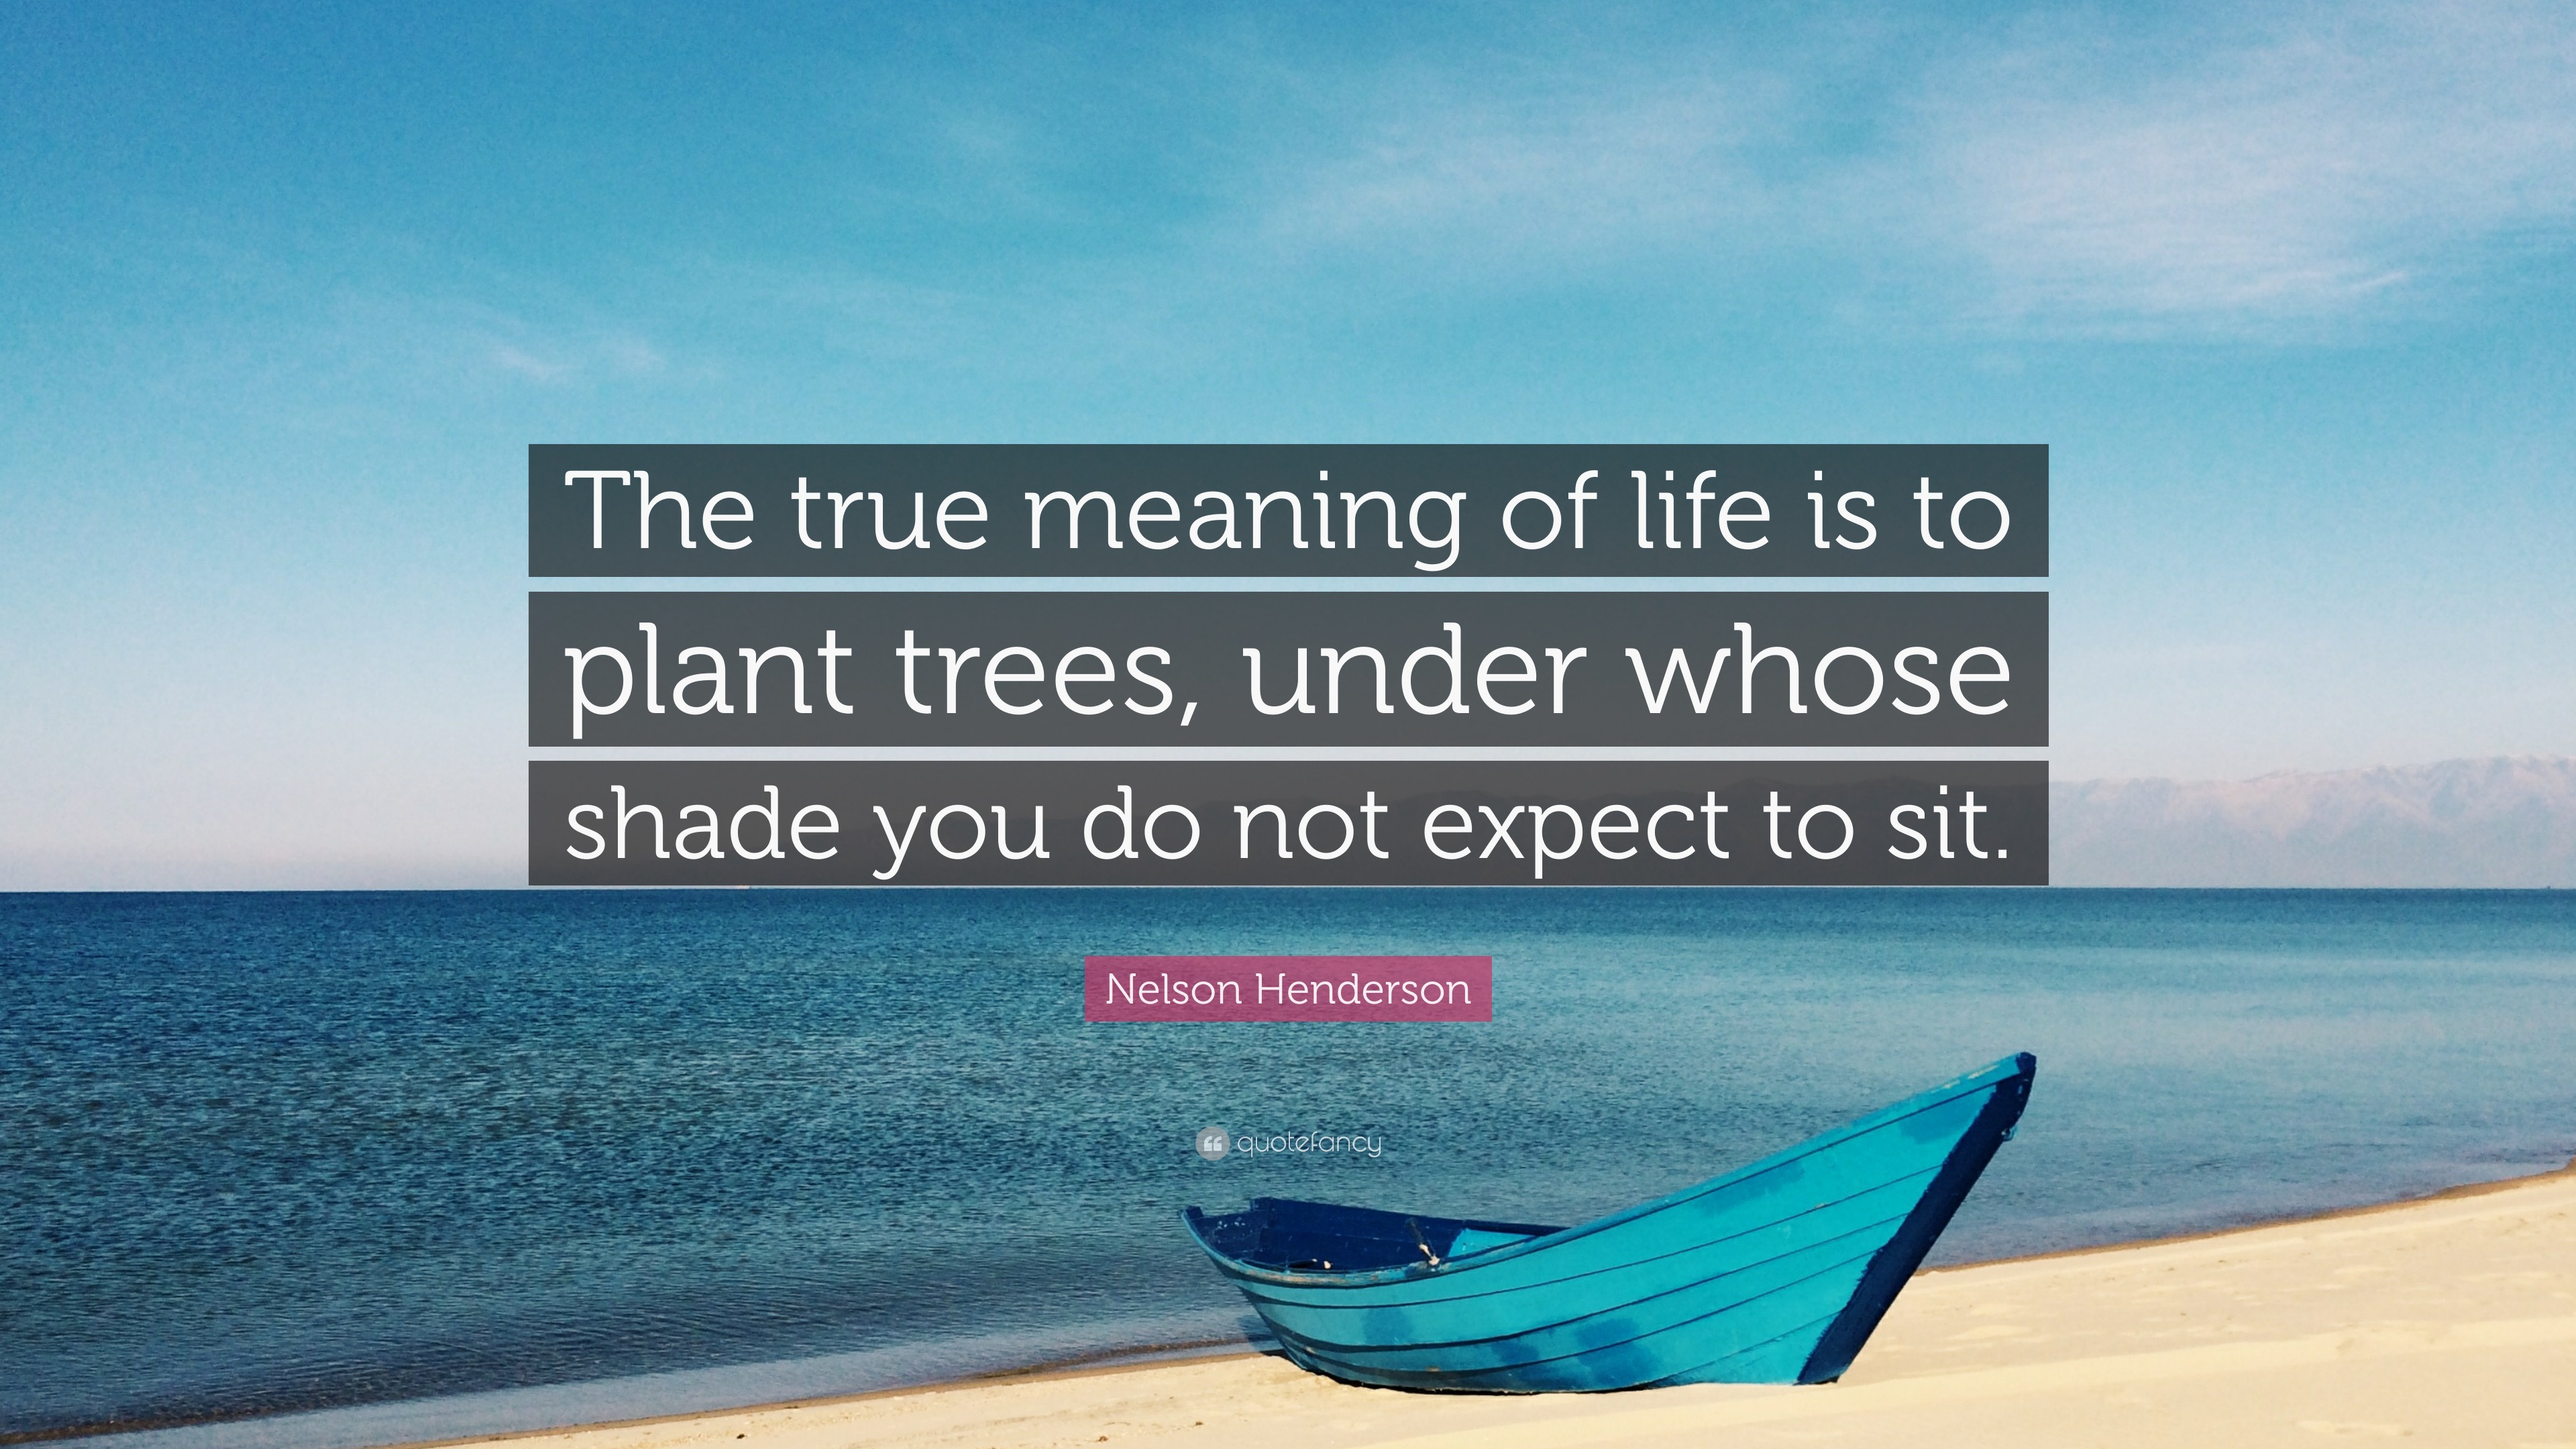 3299325 Nelson Henderson Quote The true meaning of life is to plant trees